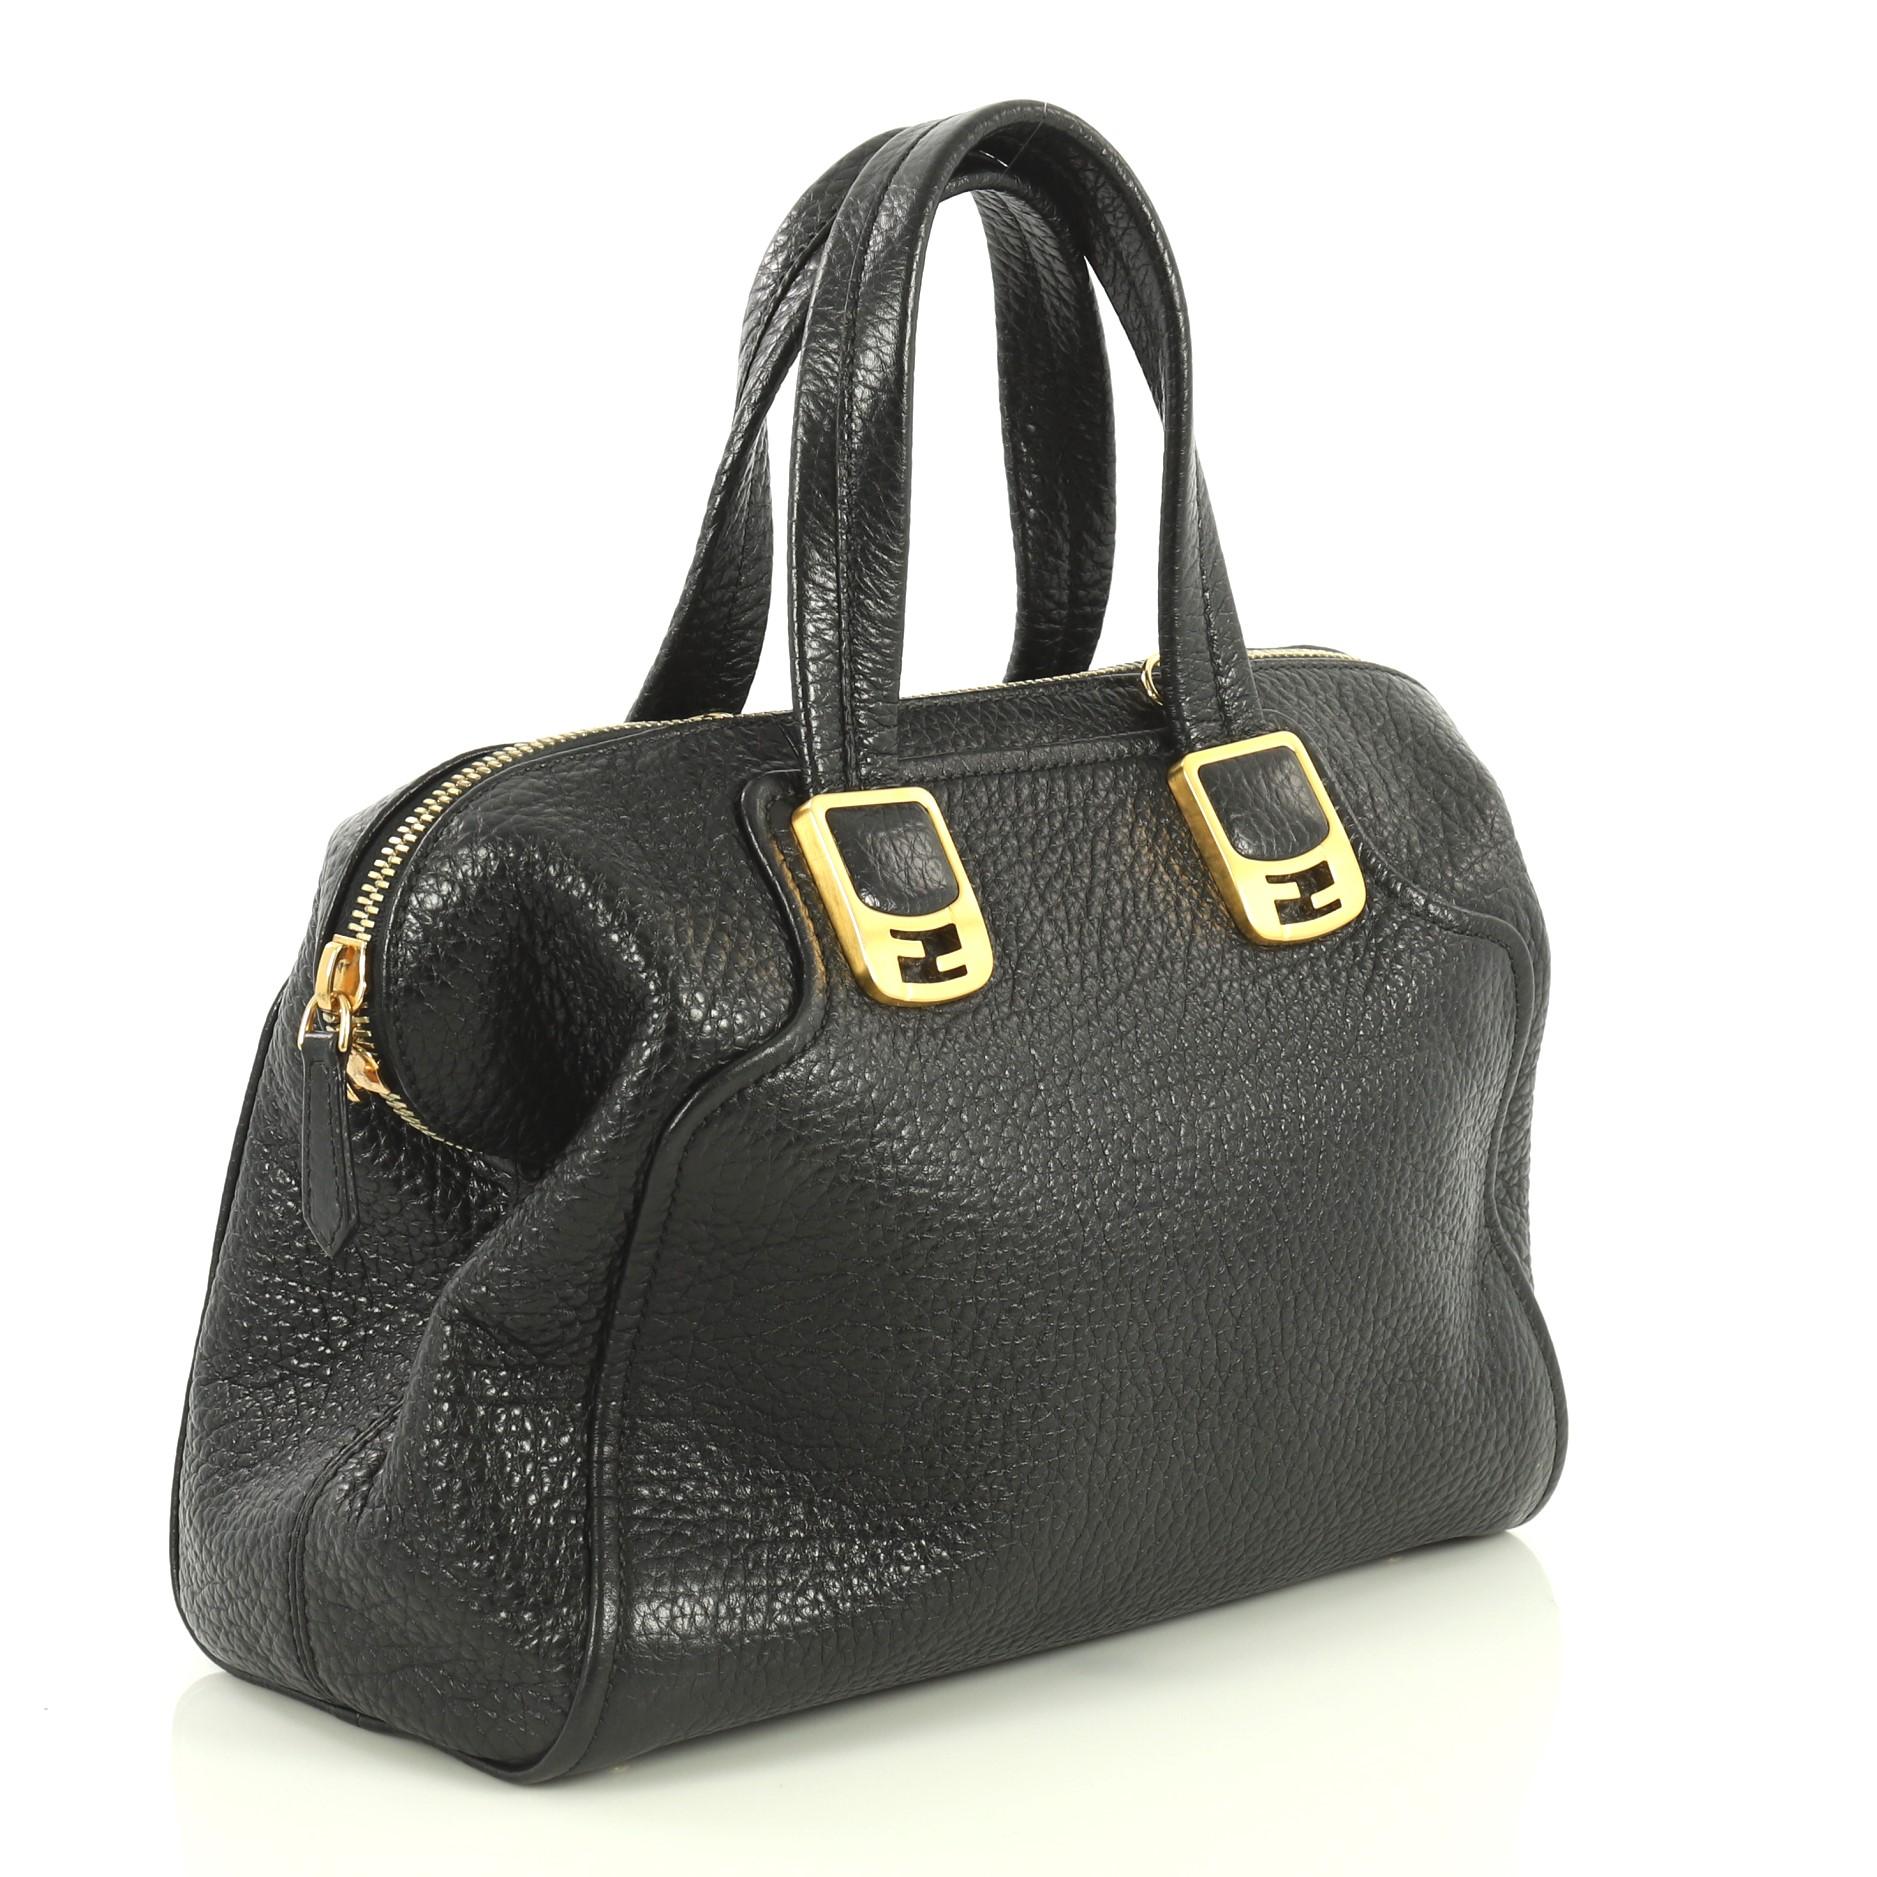 This Fendi Chameleon Satchel Leather Medium, crafted in black leather, features dual top handles accented with FF logo hardware, protective base studs, and gold-tone hardware. Its two-way zip closure opens to a gray fabric interior with middle zip